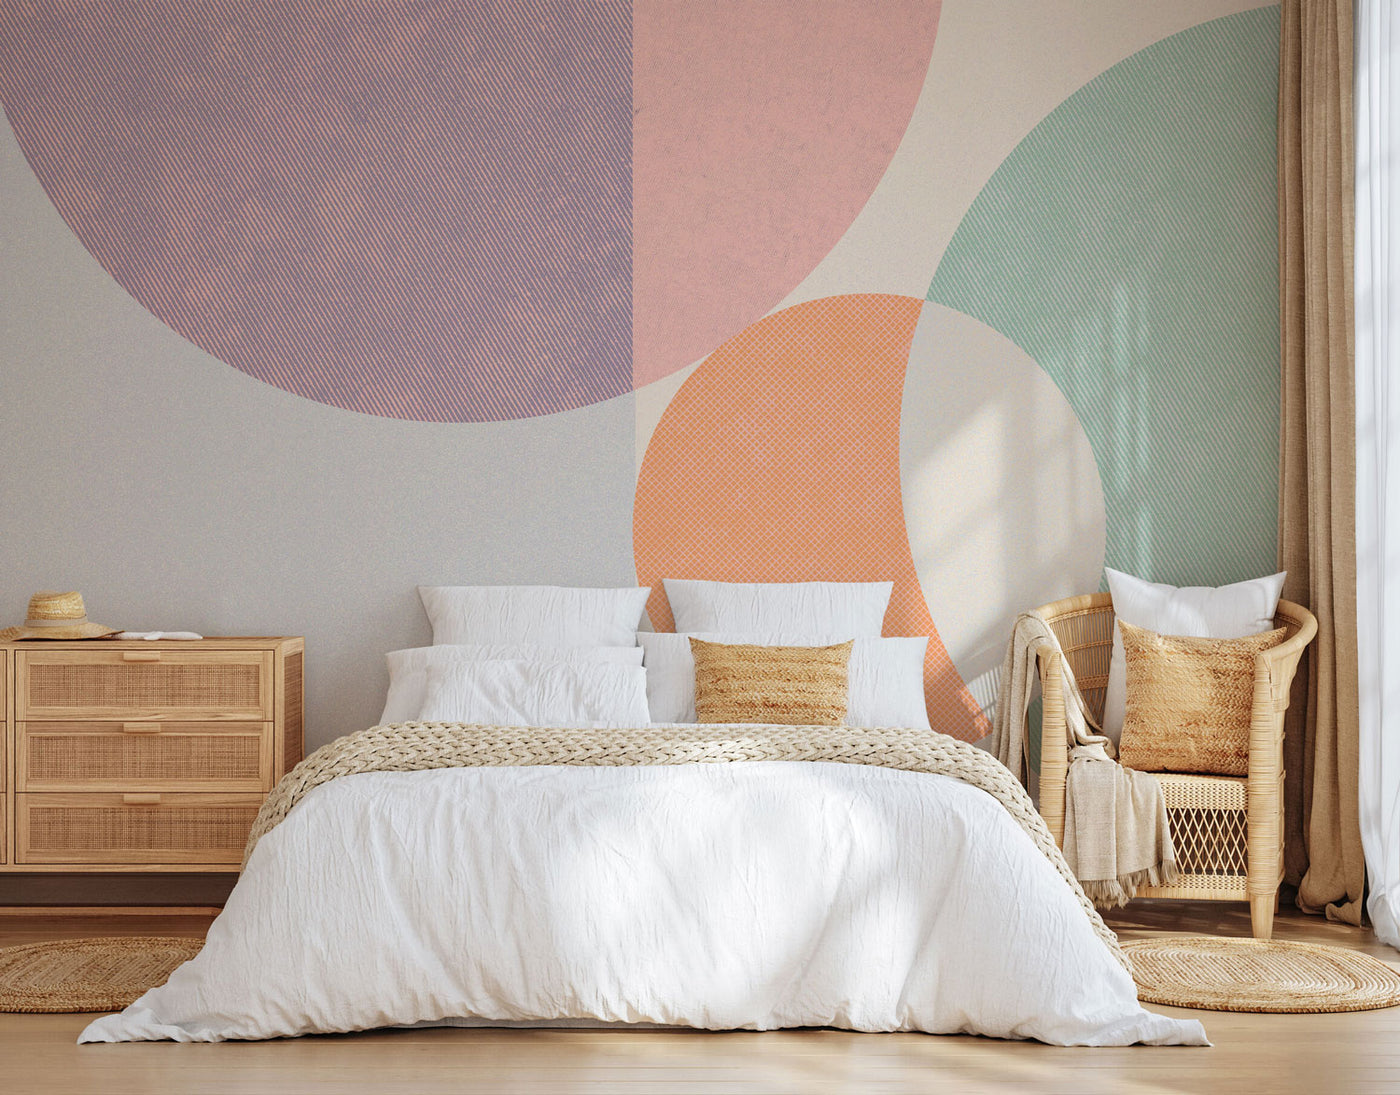 Light Retro Abstract Shapes Wall Mural